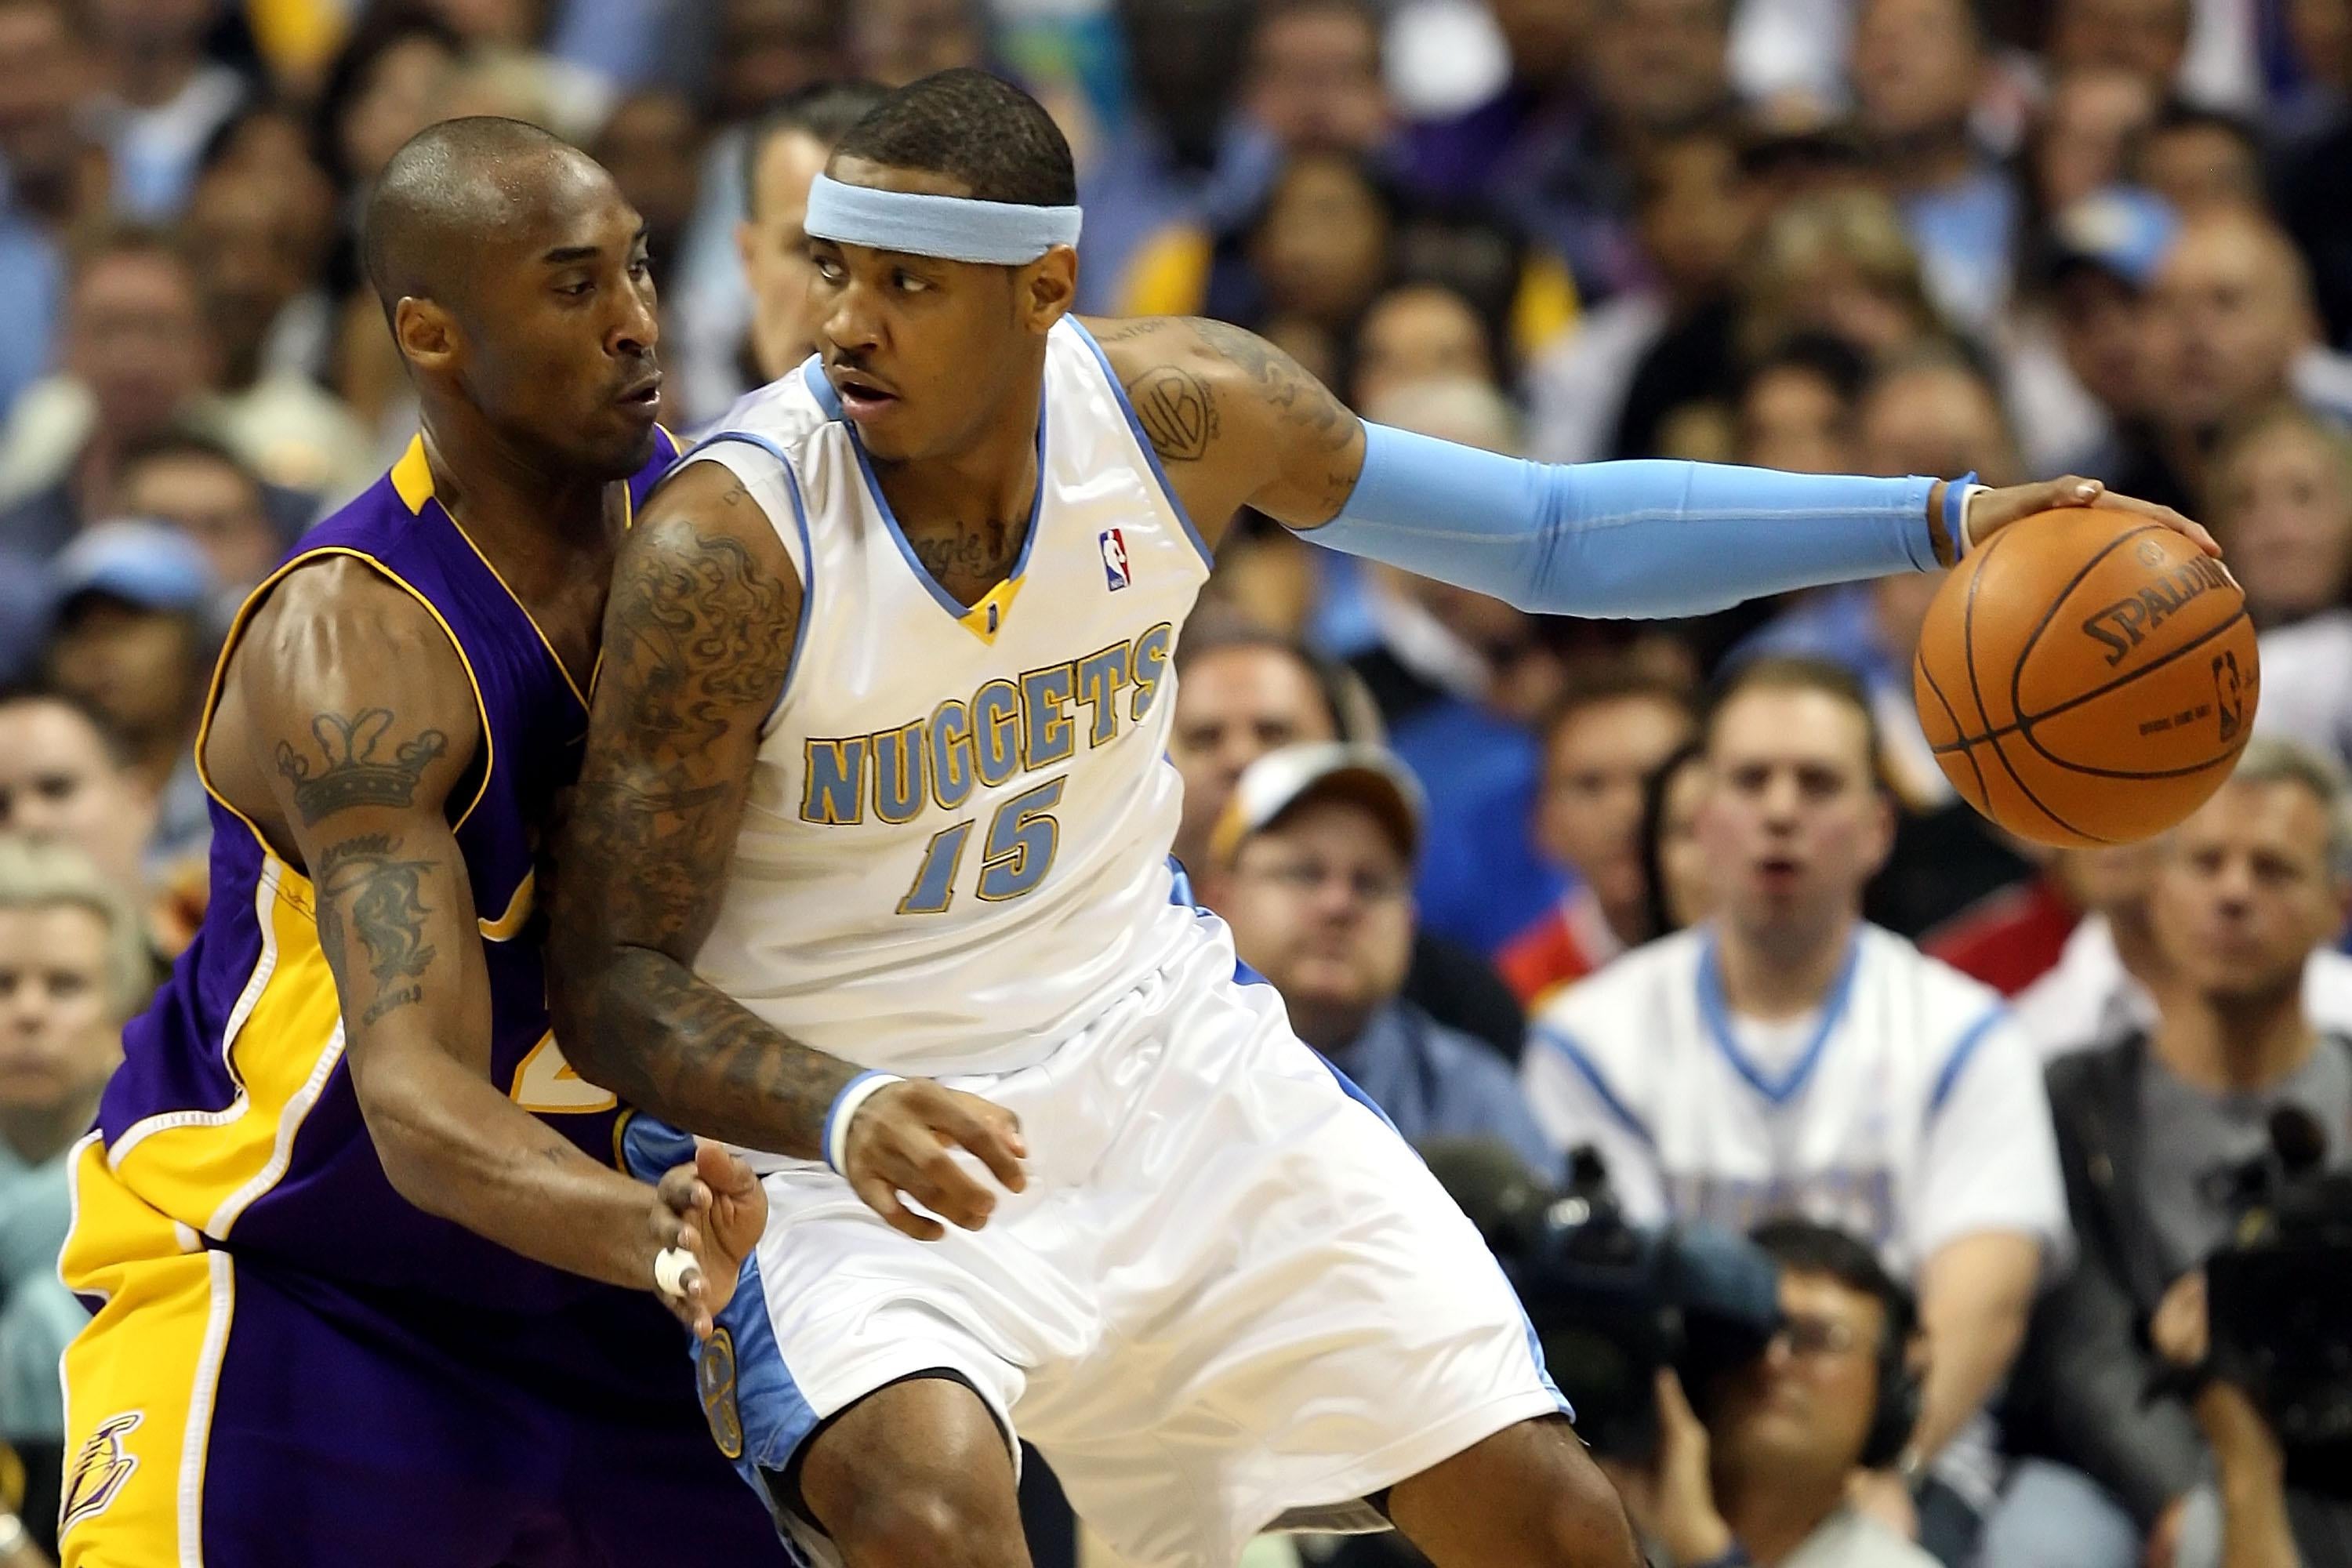 Kobe Bryant retiring in style, Carmelo Anthony's leisure look - Sports  Illustrated